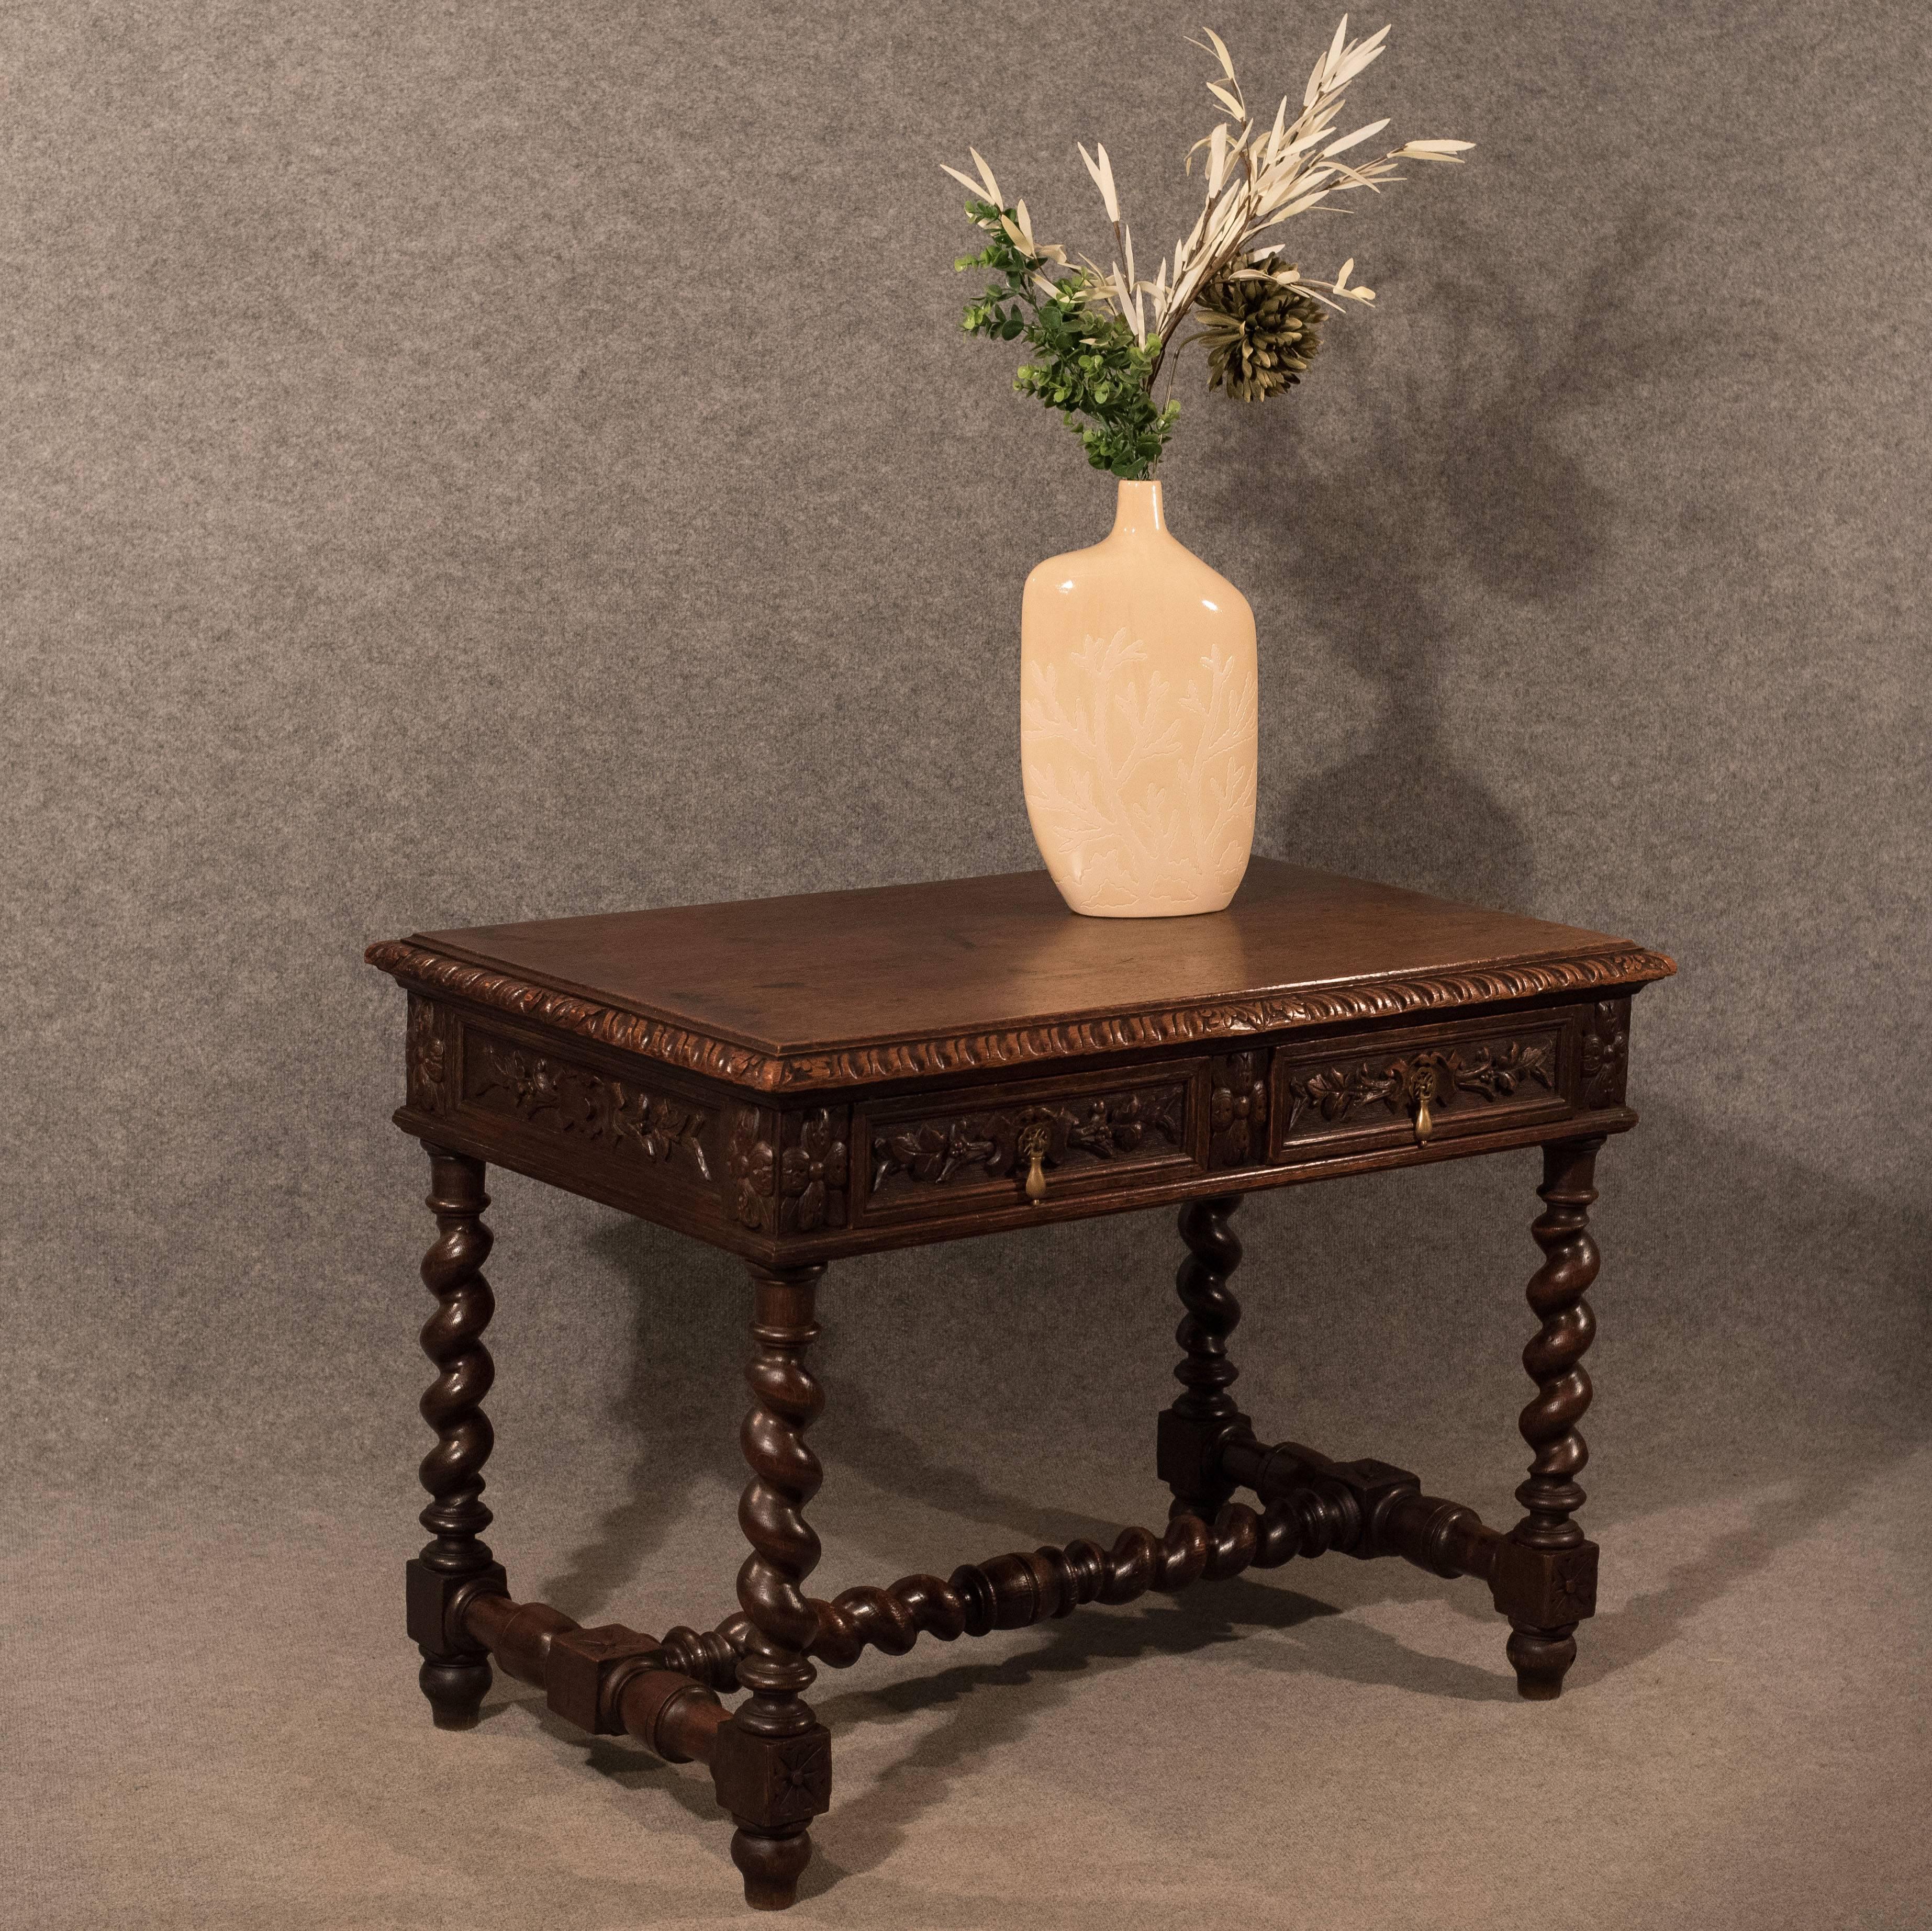 A very pleasing English oak desk table presented in good antique condition
Original Victorian, circa 1870
Displaying superb fat barley twist legs set in mirrored opposition and united by a barley twist stretcher
Solid quality oak delivering a